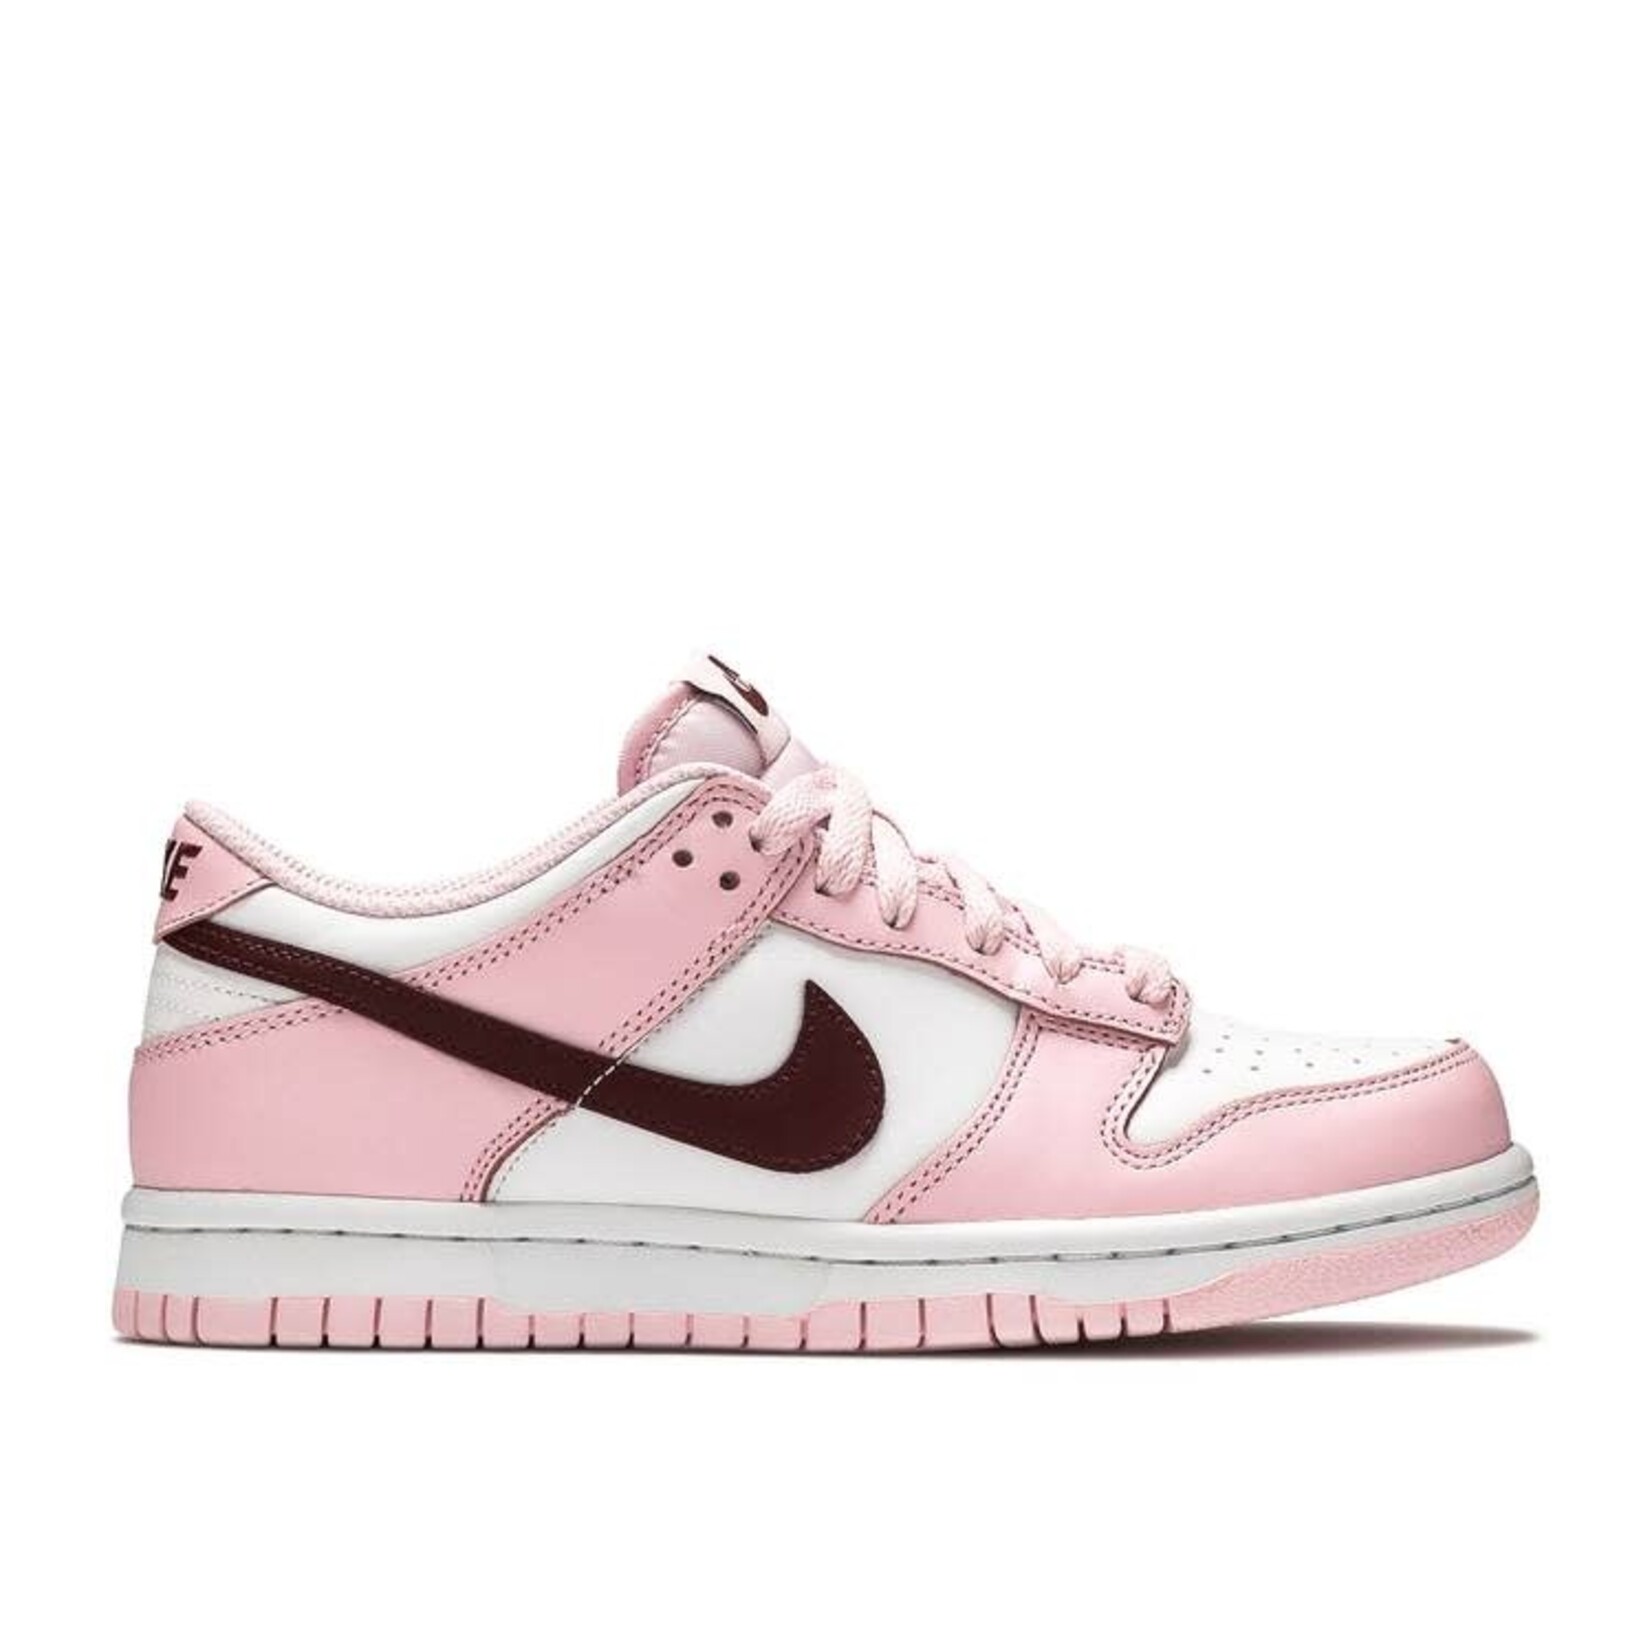 Nike Nike Dunk Low Pink Foam Red White (GS) Size 5.5, DS BRAND NEW